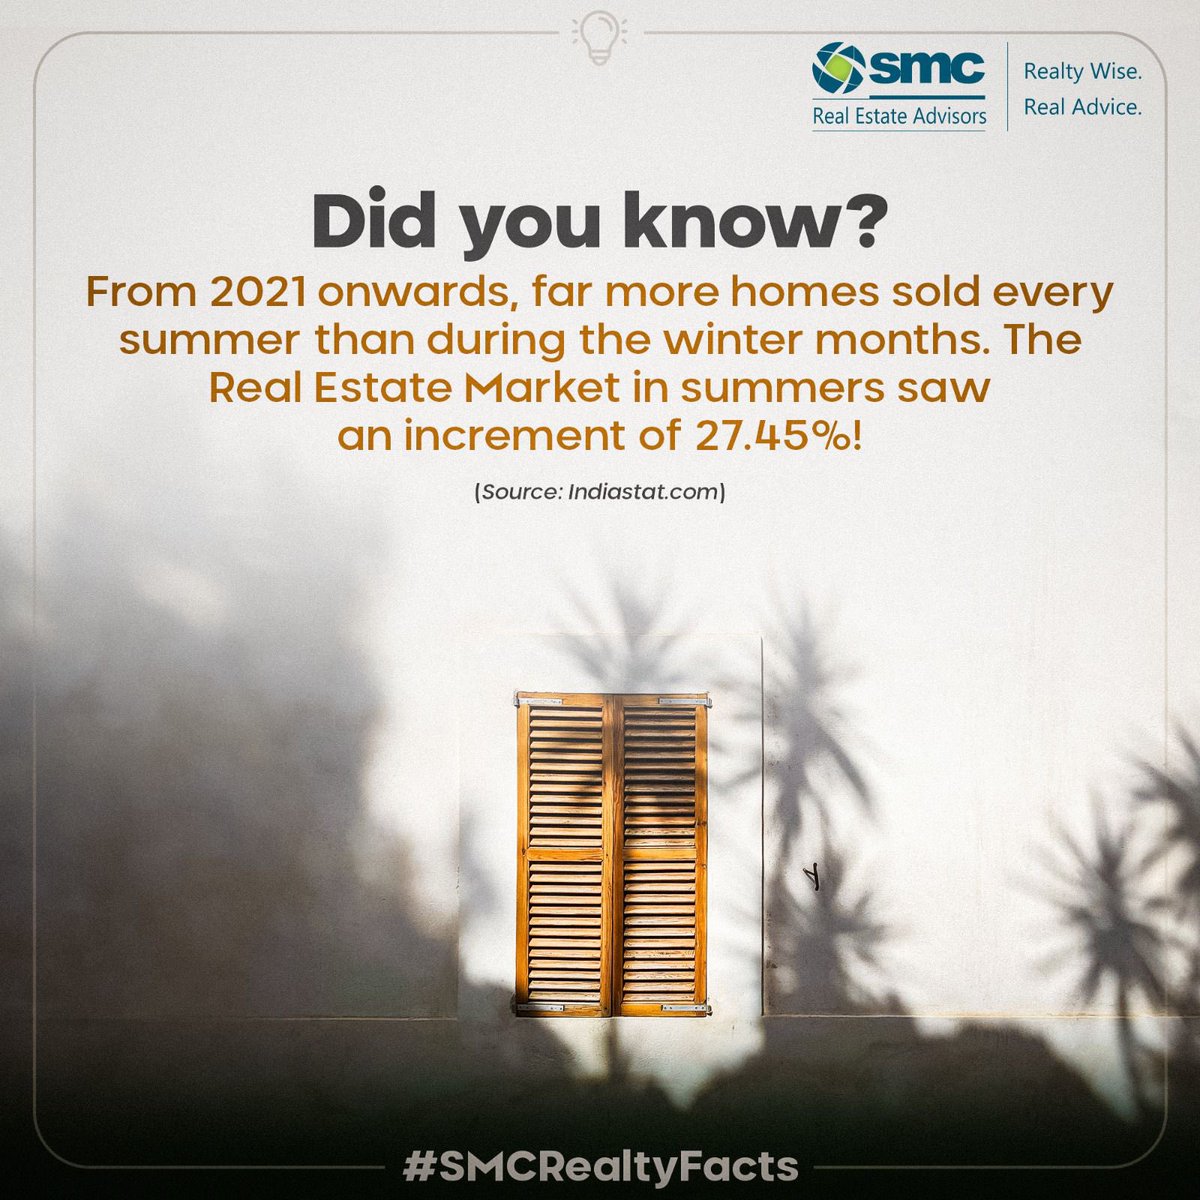 For more such interesting updates, keep following #SMCRealty
.
.
#SMCRealty #SMCRealtyFacts #RealEstateIndia #RealtyIndia #RealEstateFactsIndia #RealtyFactsIndia #Facts2023 #FunFacts2023 #RealtorIndia #HomesIndia #LuxuryHomesIndia #DidYouKnowFacts #DidYouKnowThis #UniqueHomes